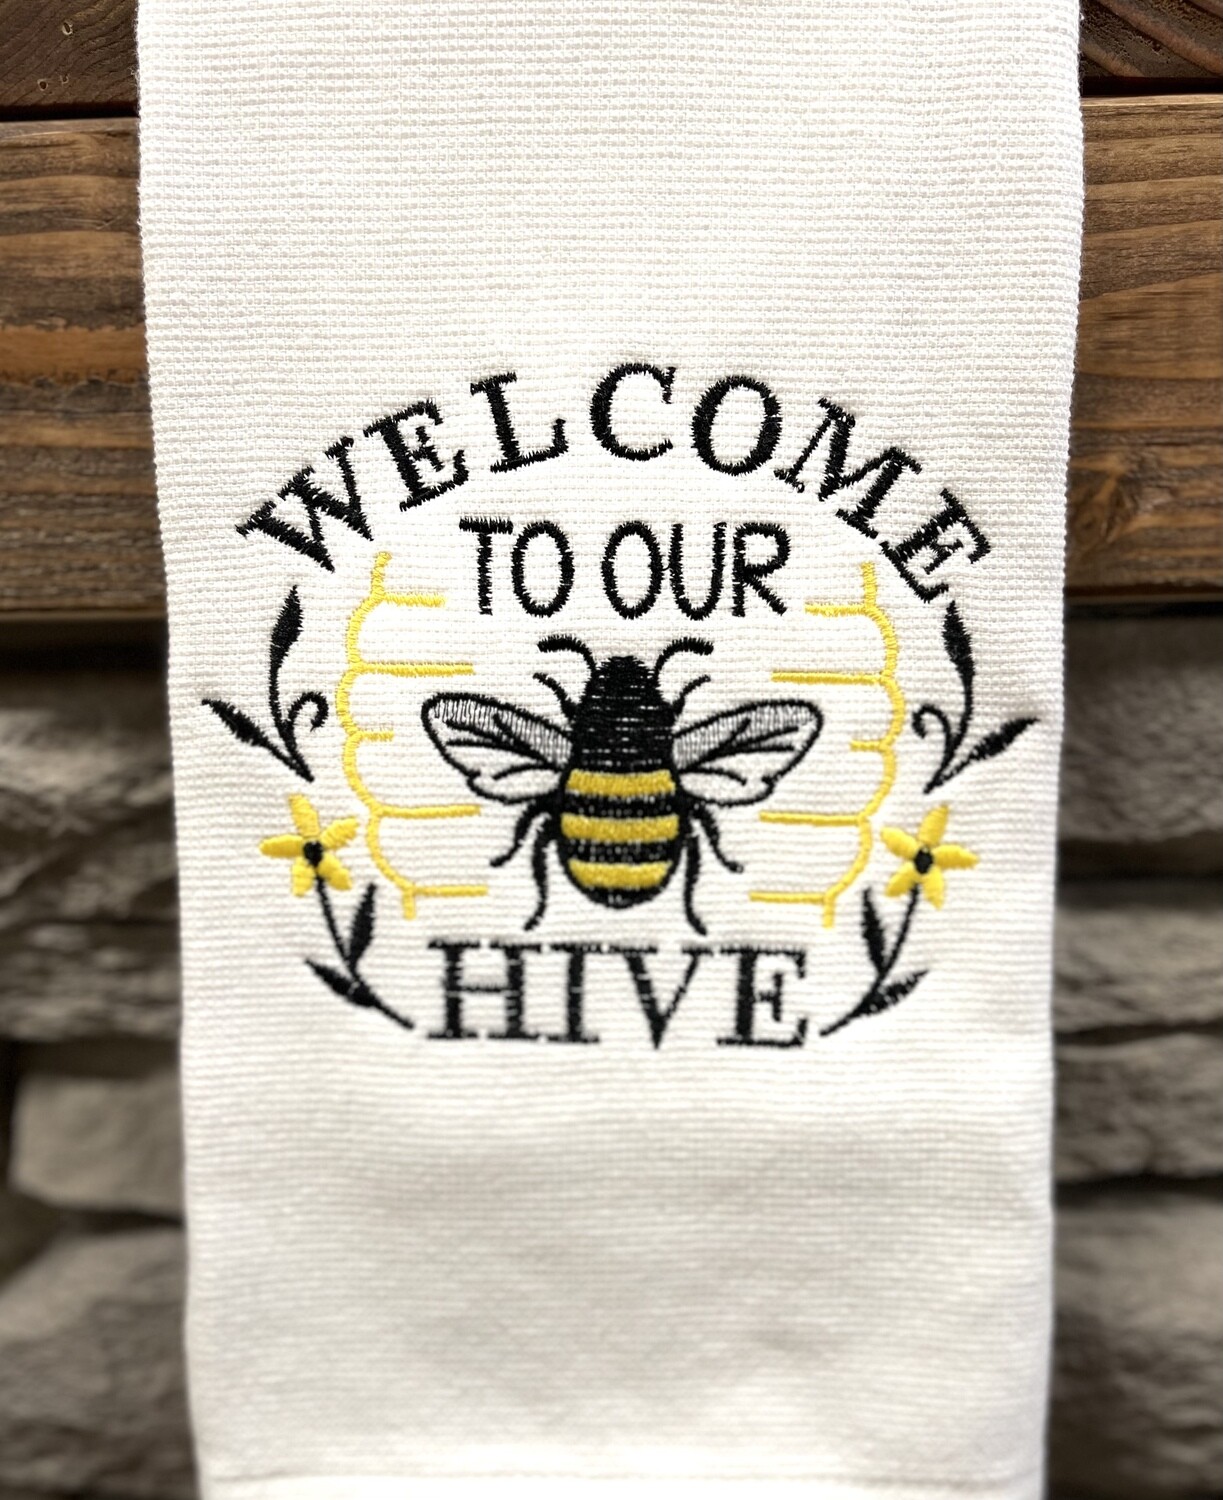 Welcome to our Hive